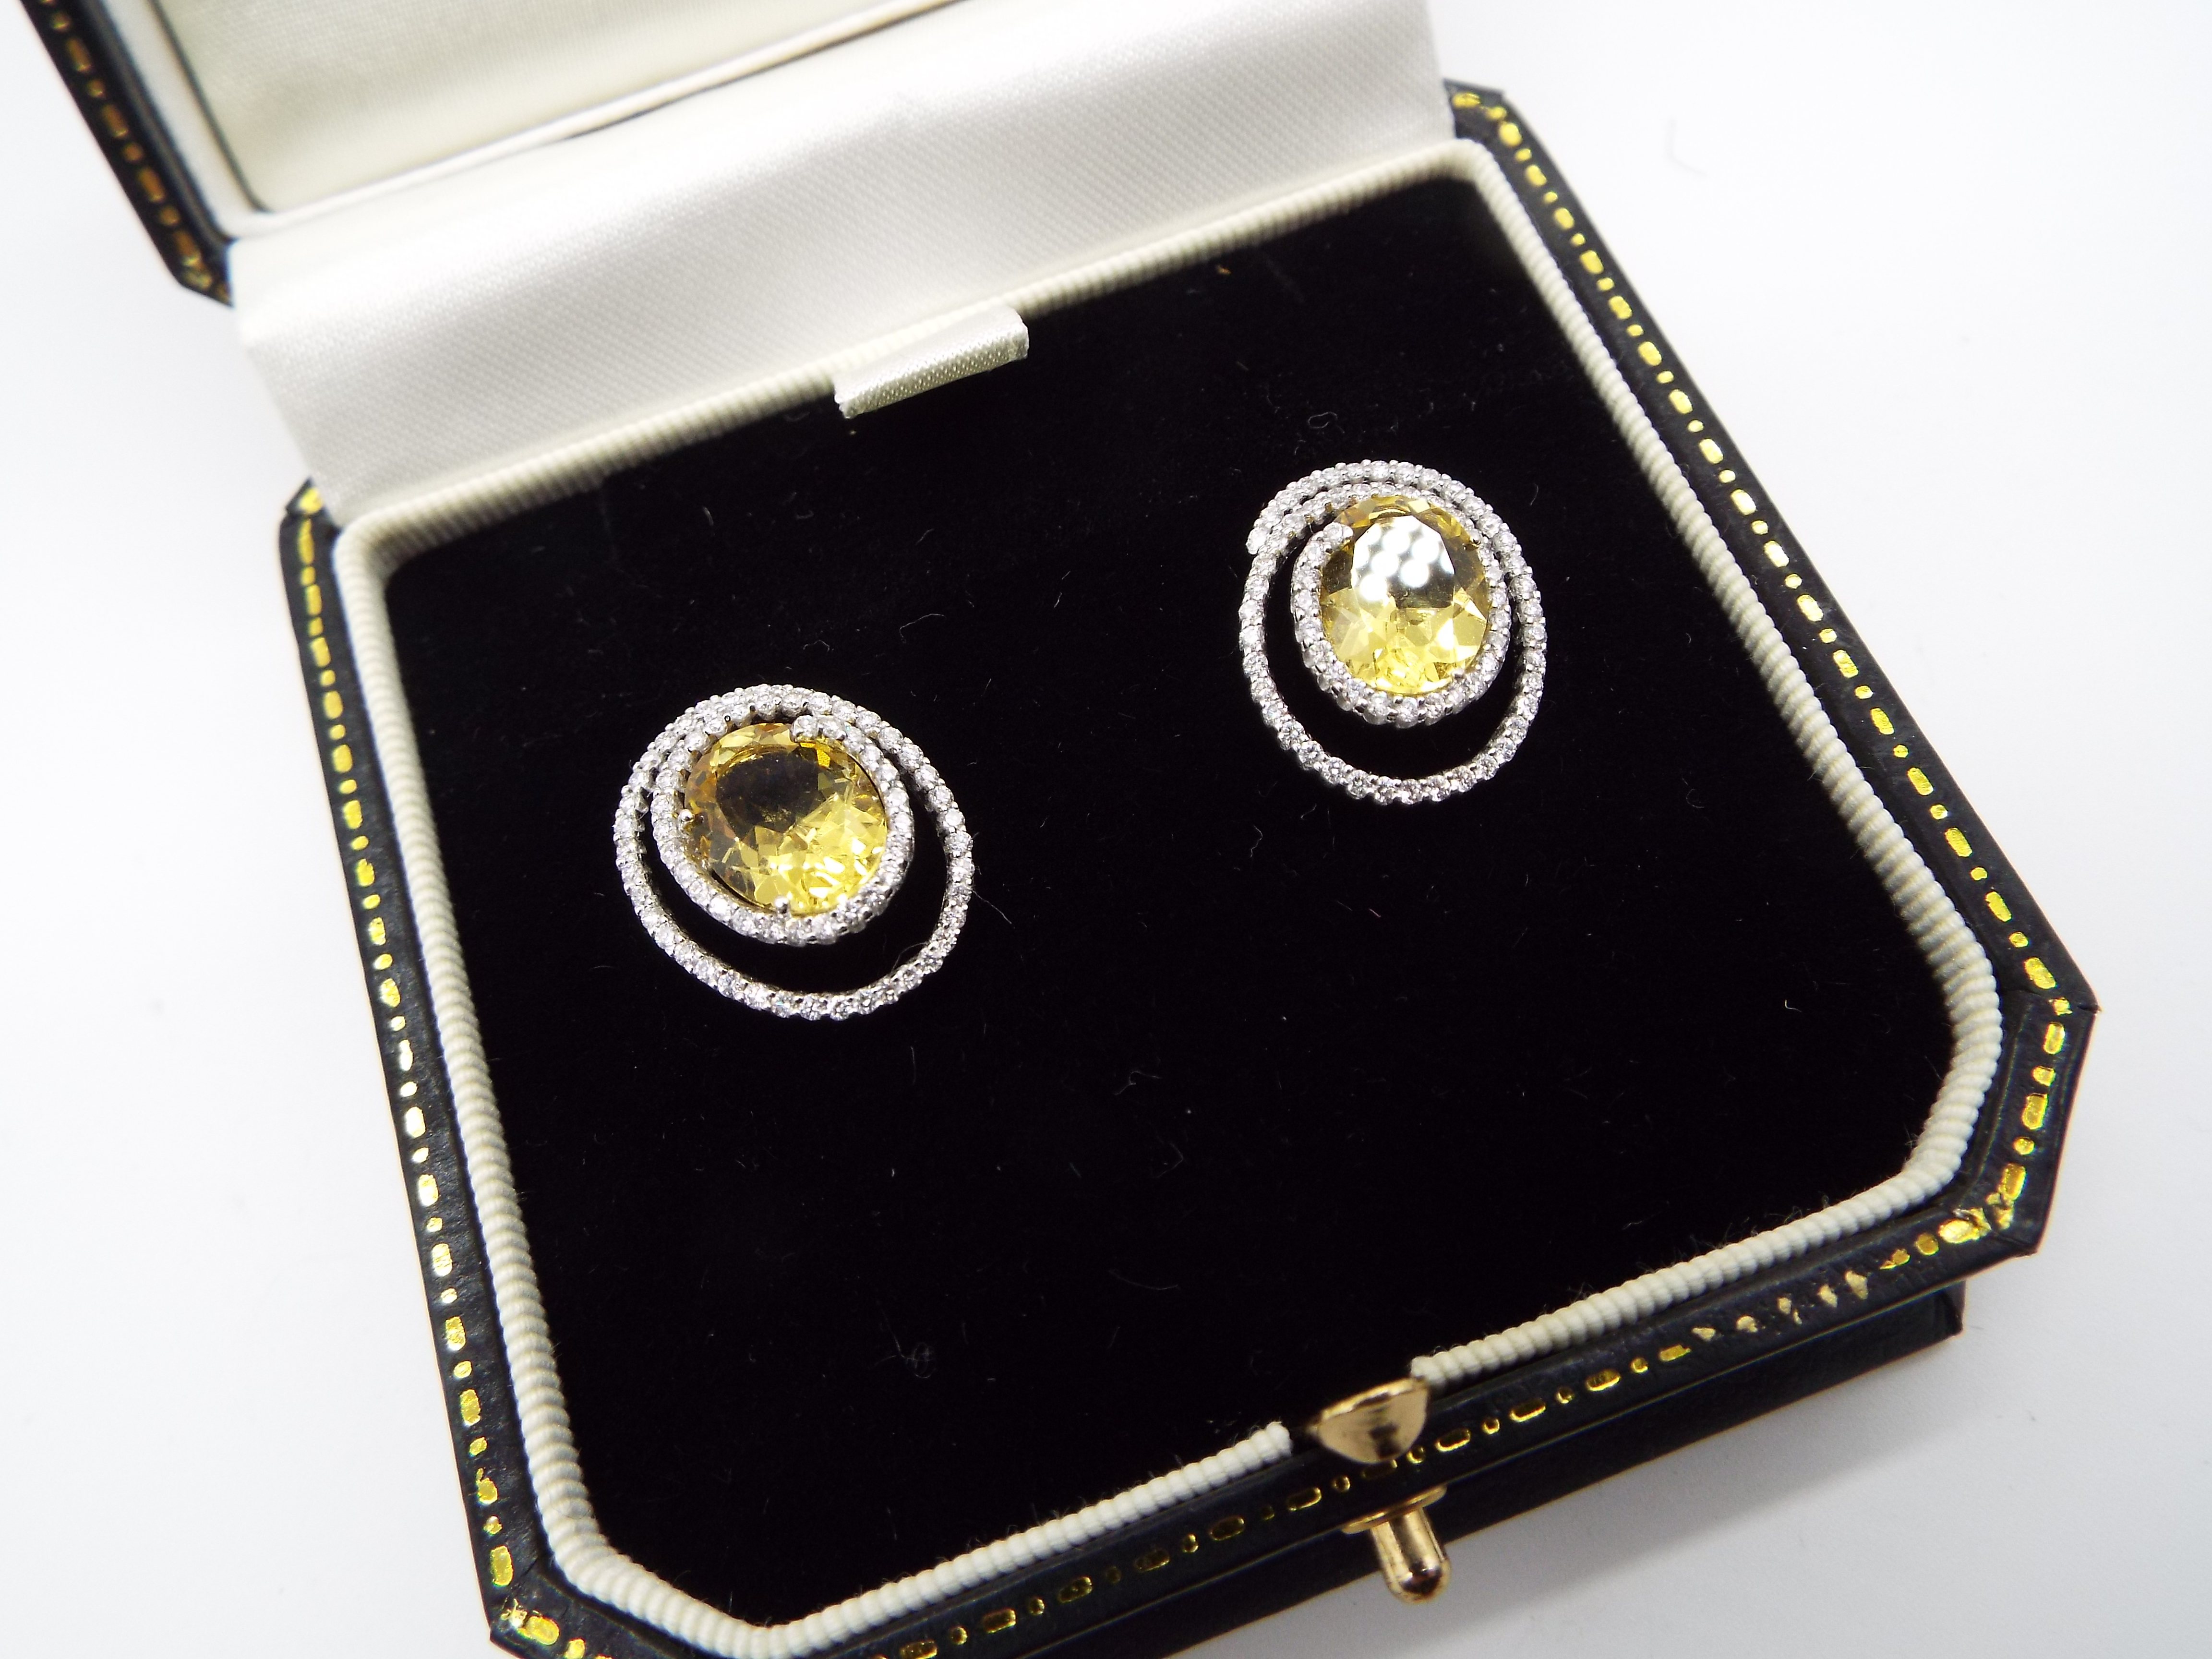 A pair of yellow Beryl and white Diamond earrings with white metal mounts stamped 18K (18 carat), - Image 2 of 3